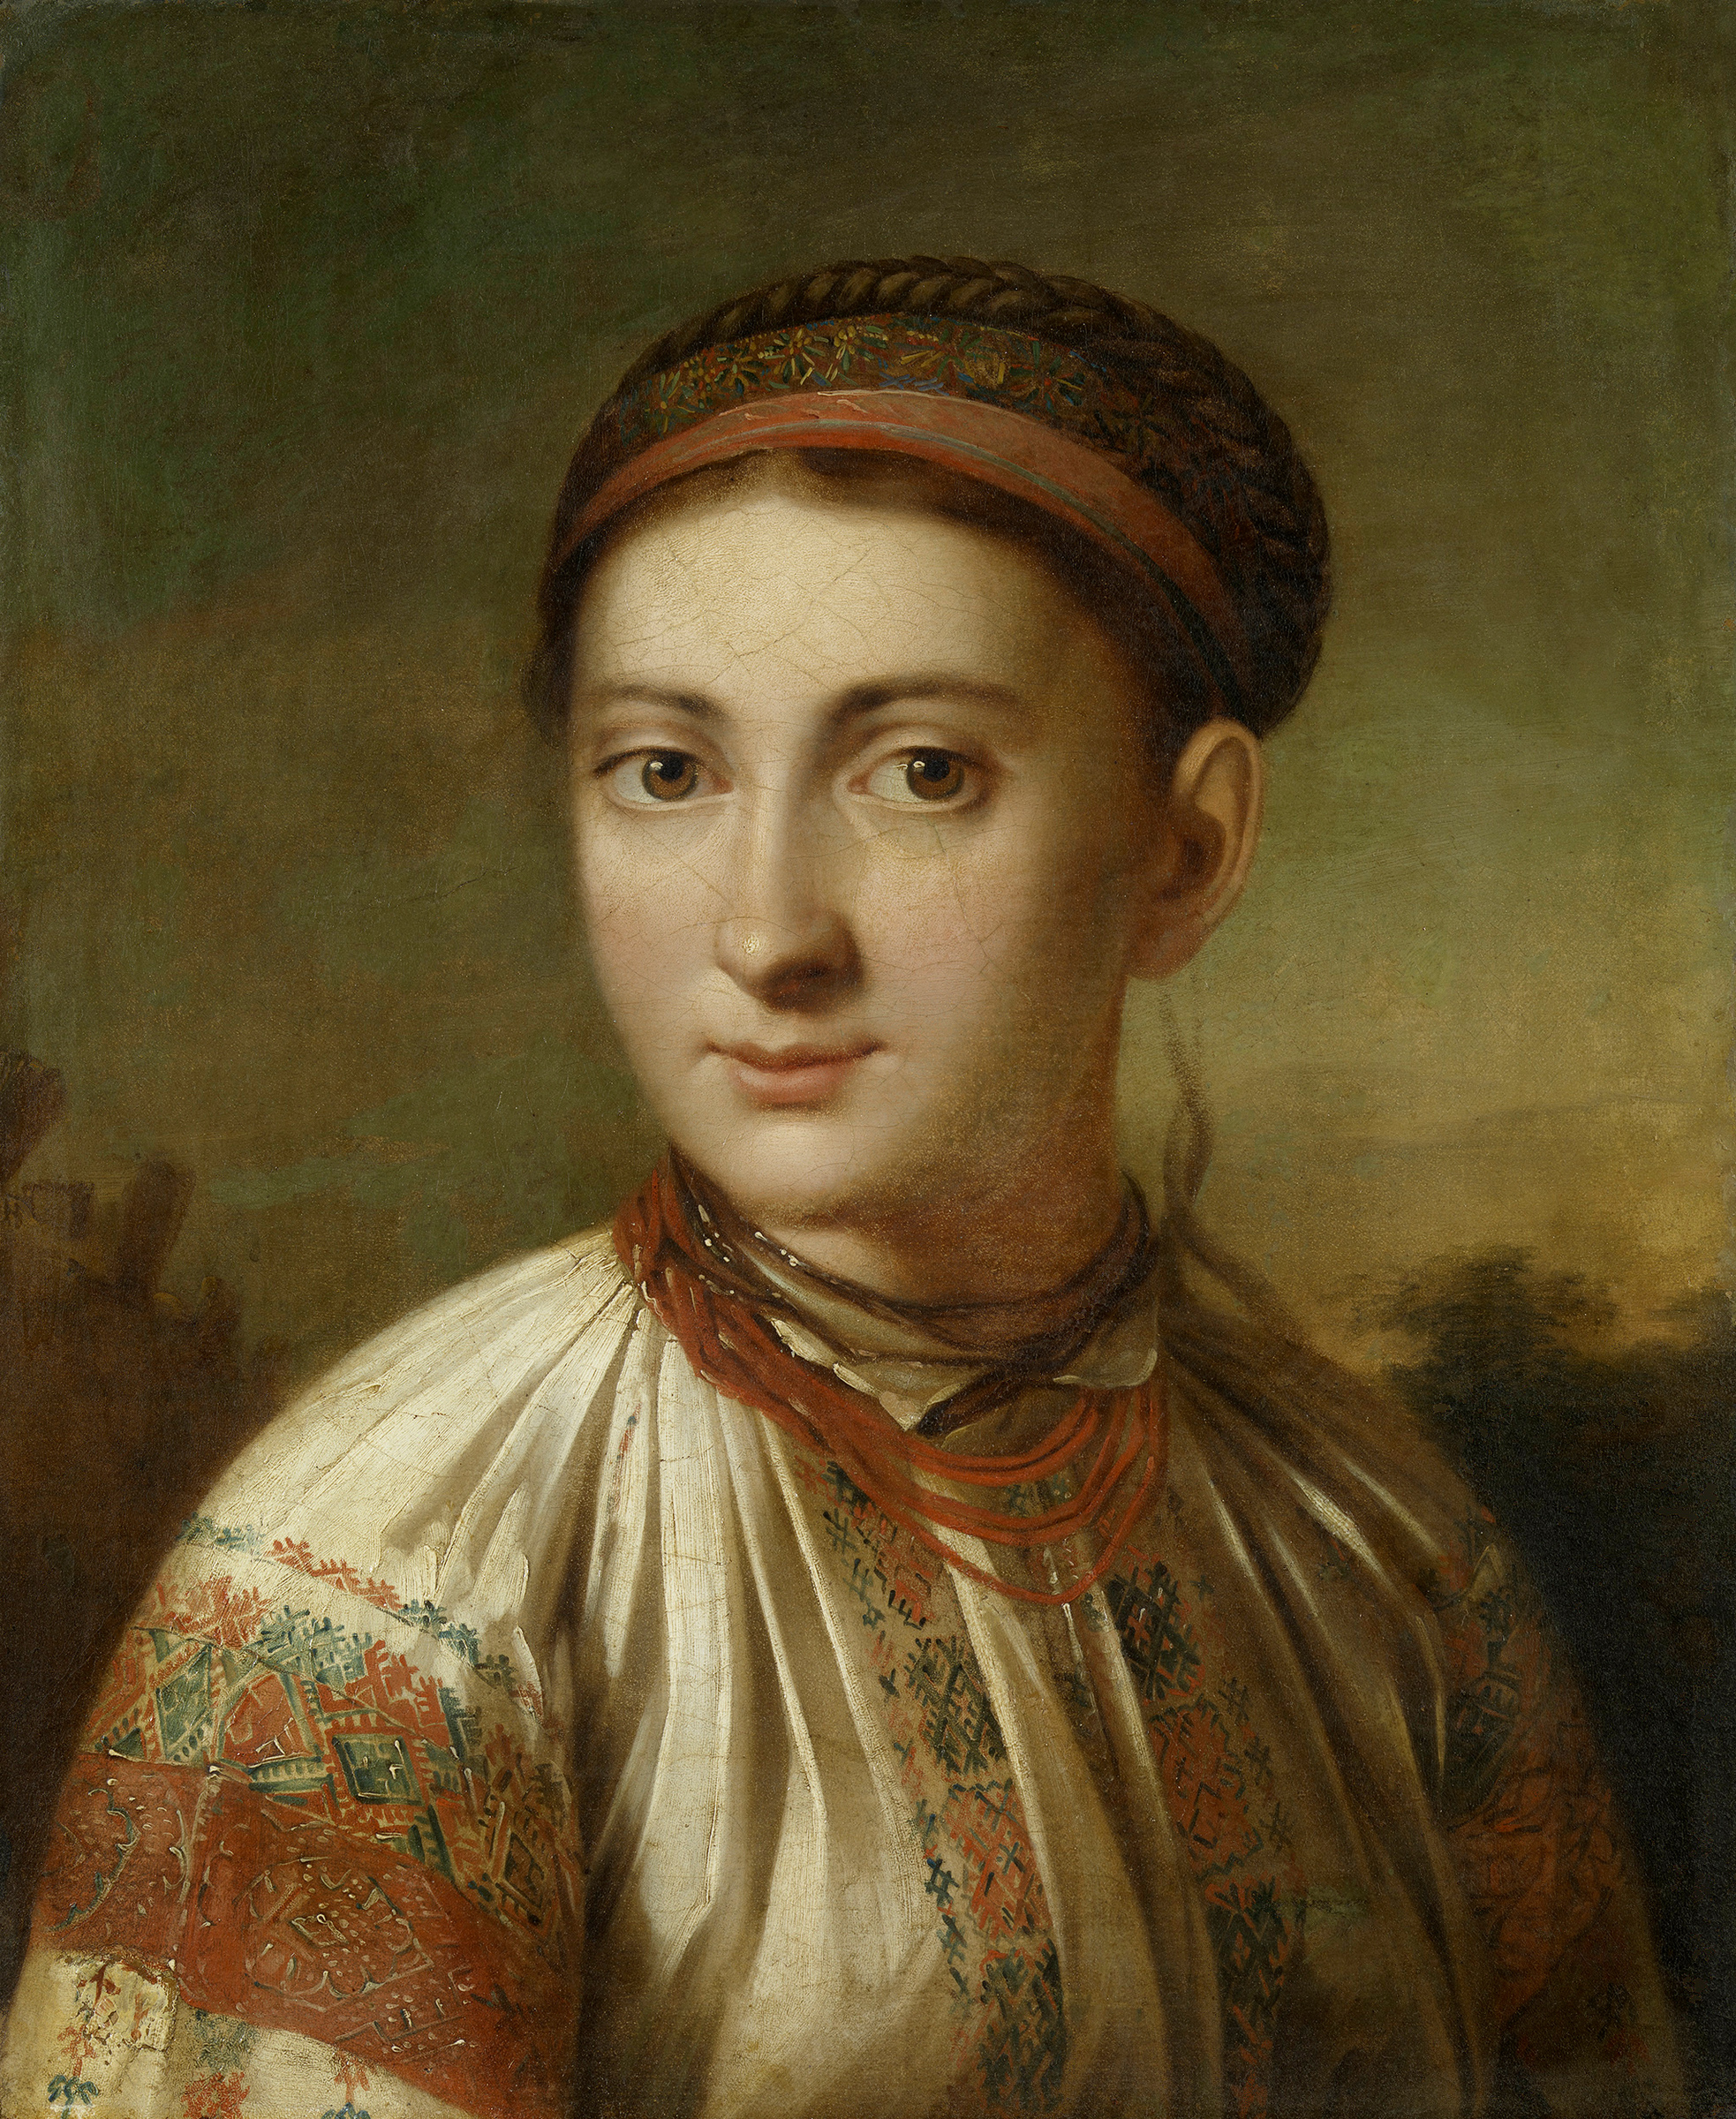 Portrait of a Girl from Podillia.